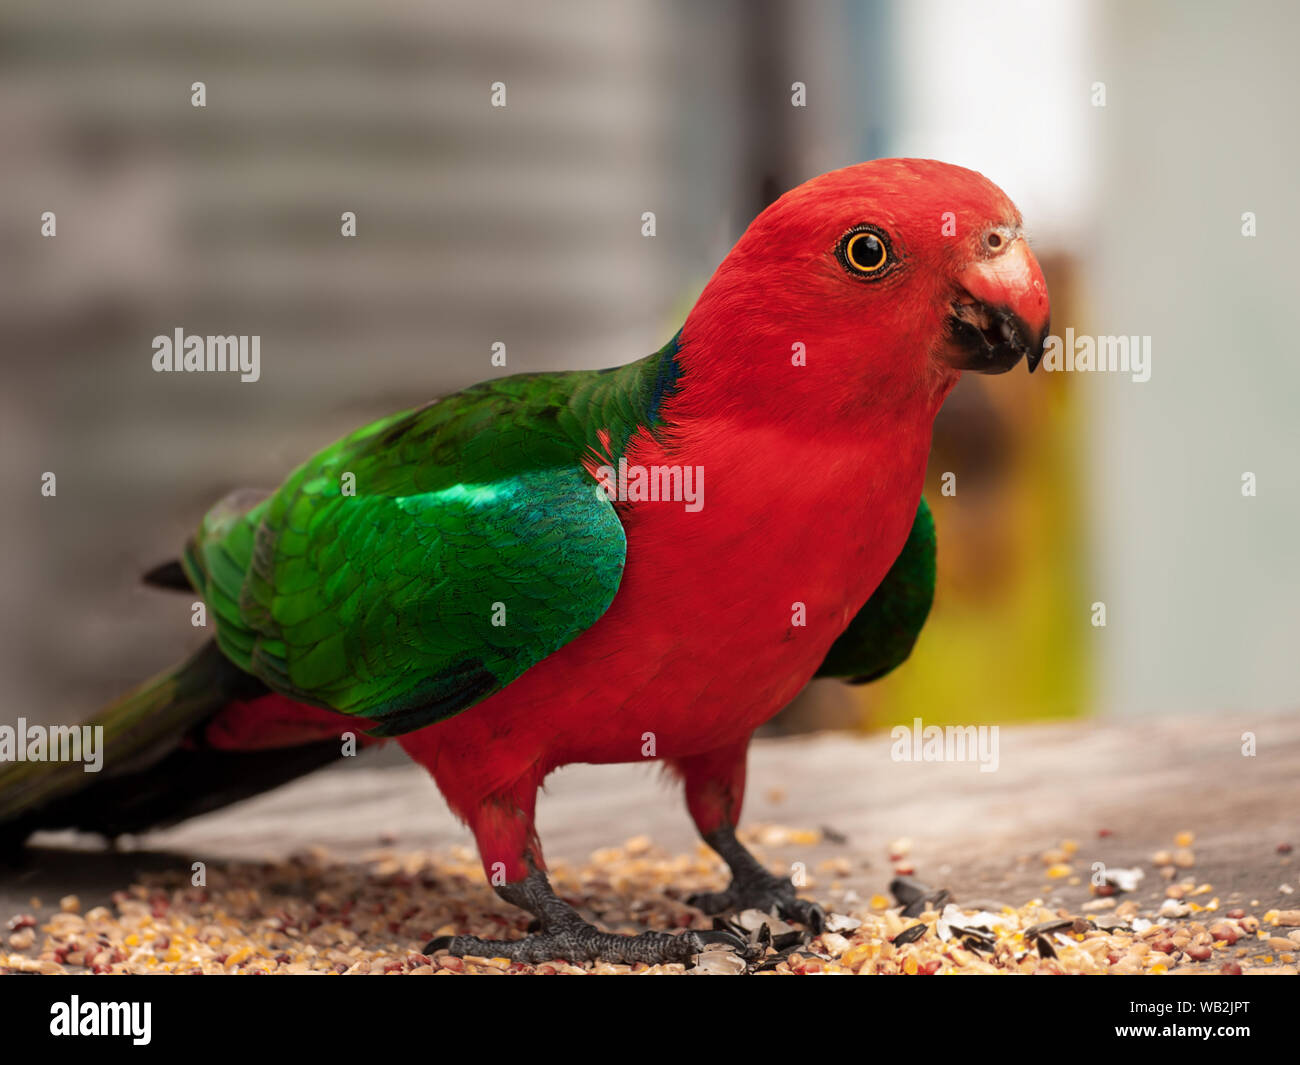 Australian native bird, red and green king parrot Stock Photo